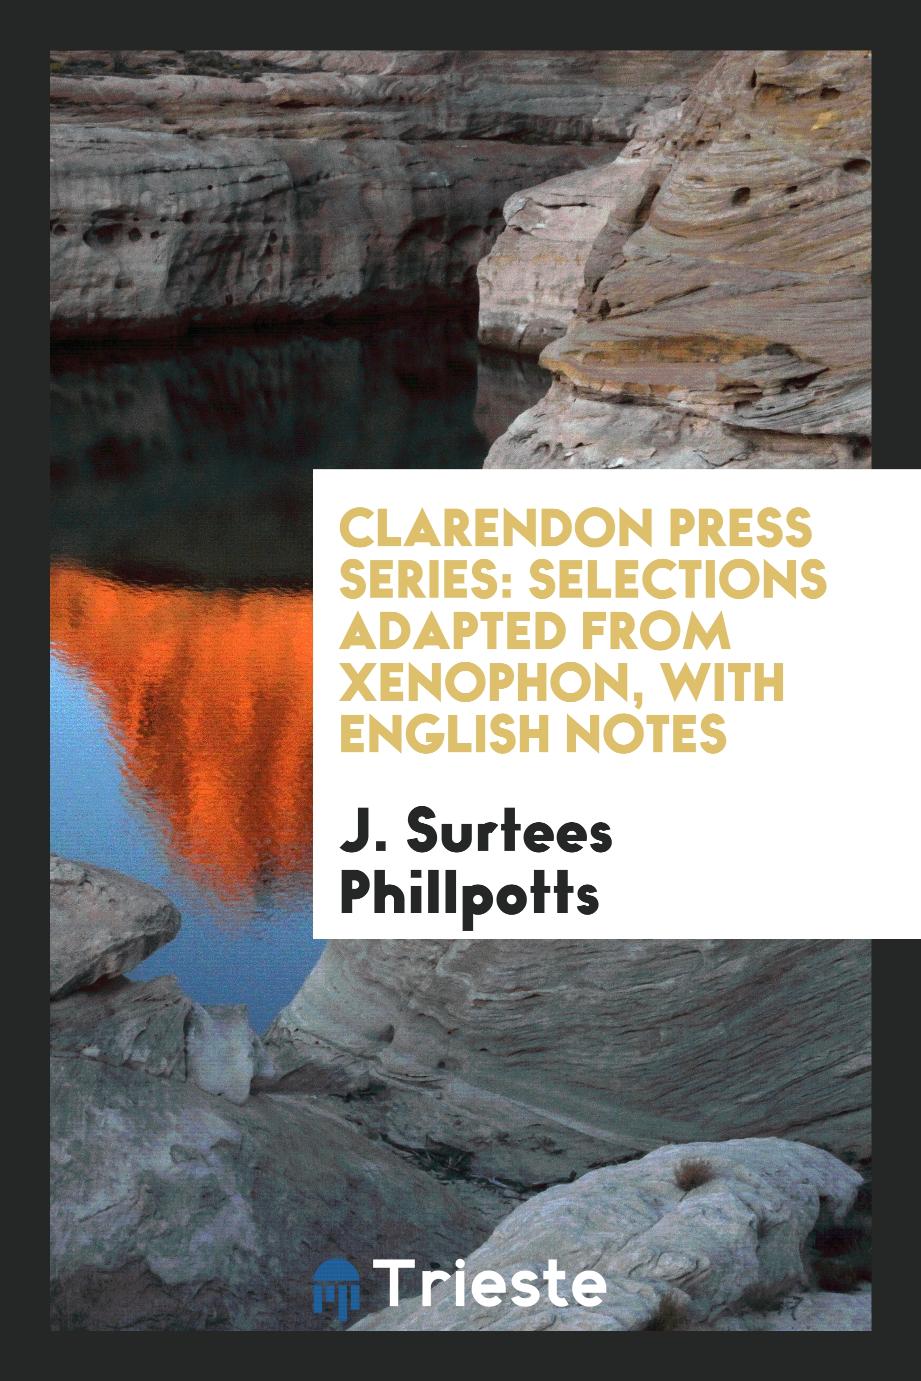 Clarendon Press Series: Selections Adapted from Xenophon, With English Notes